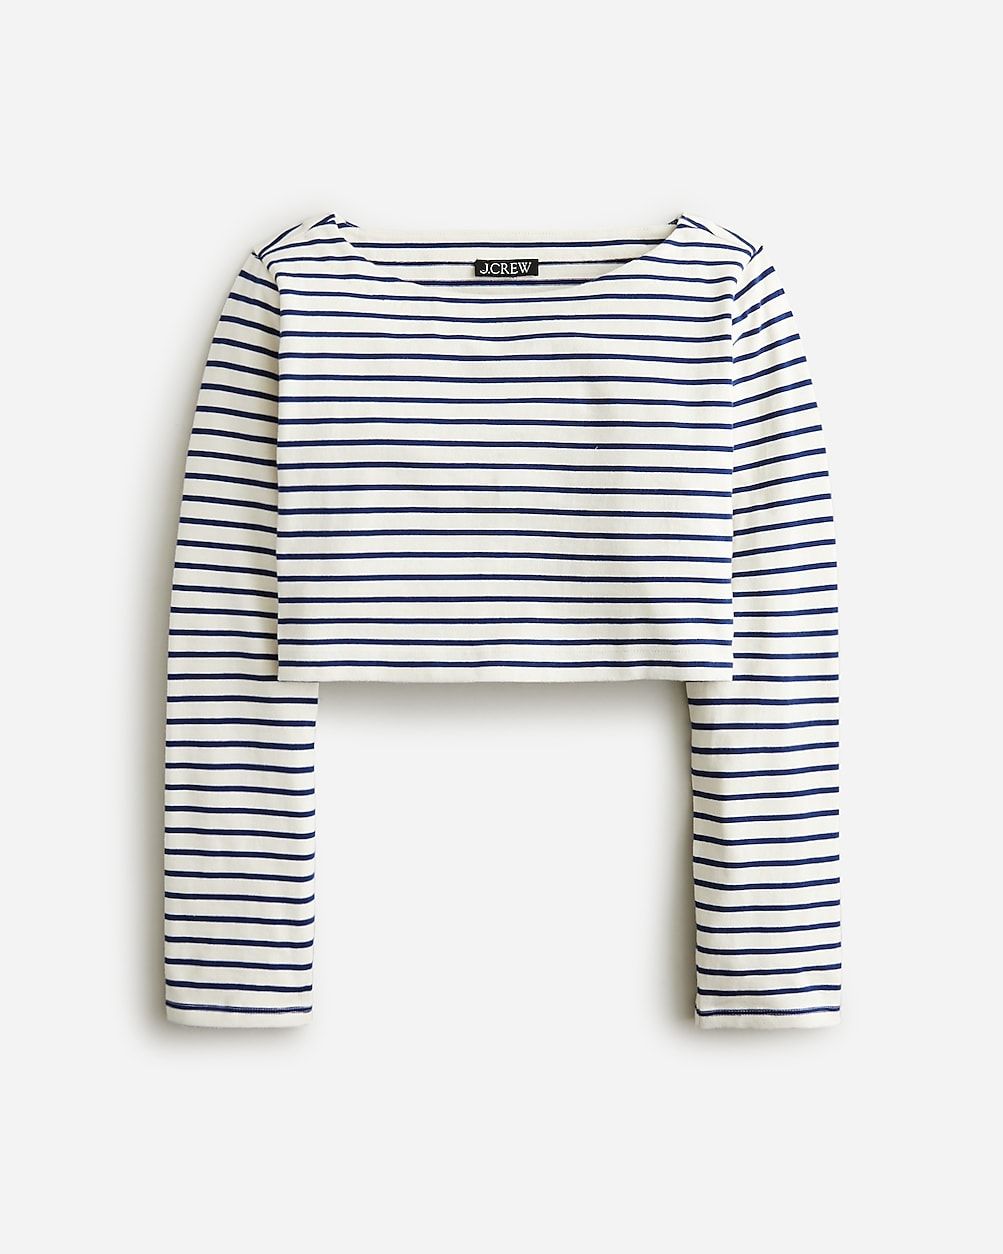 Limited-edition ultracropped boatneck T-shirt in mariner cotton | J.Crew US